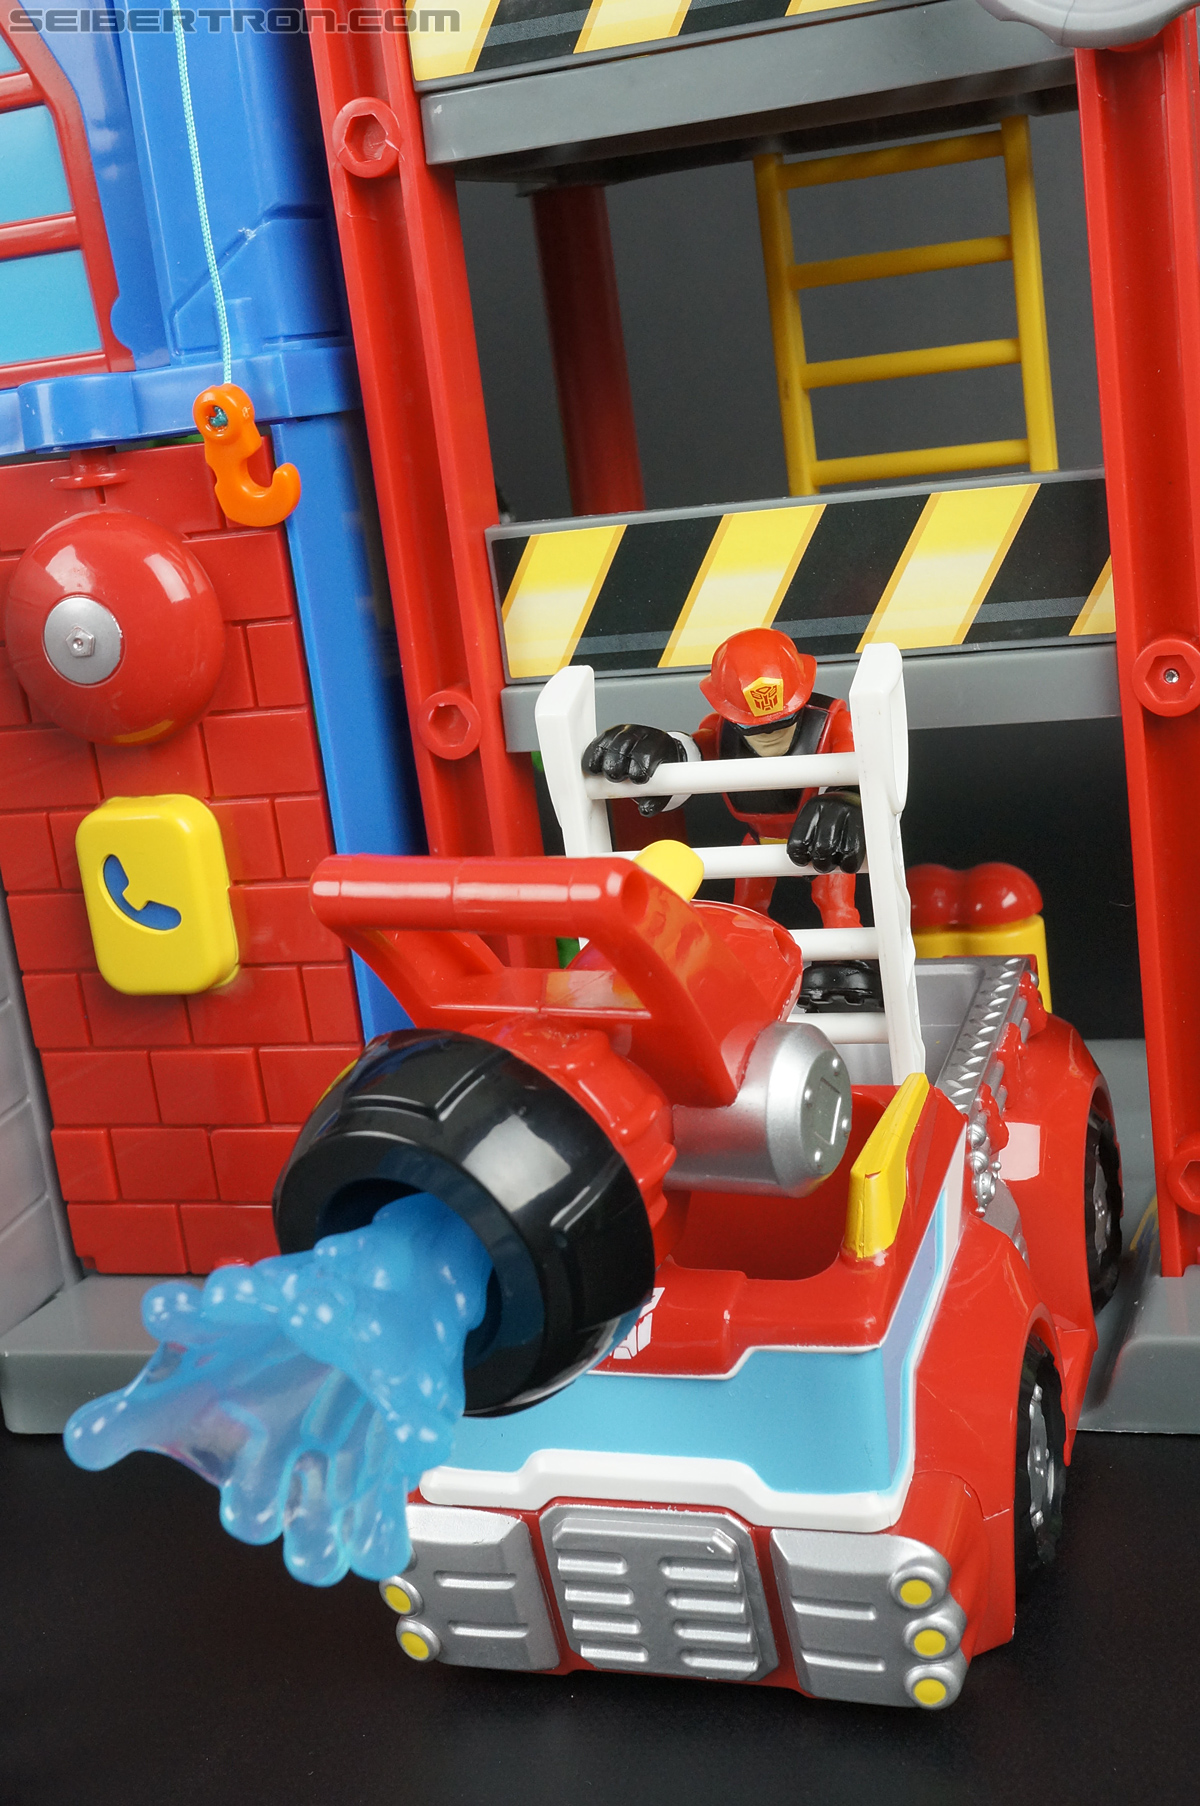 Transformers Rescue Bots Heatwave the Fire-Bot (Fire Station Prime) (Image #55 of 64)